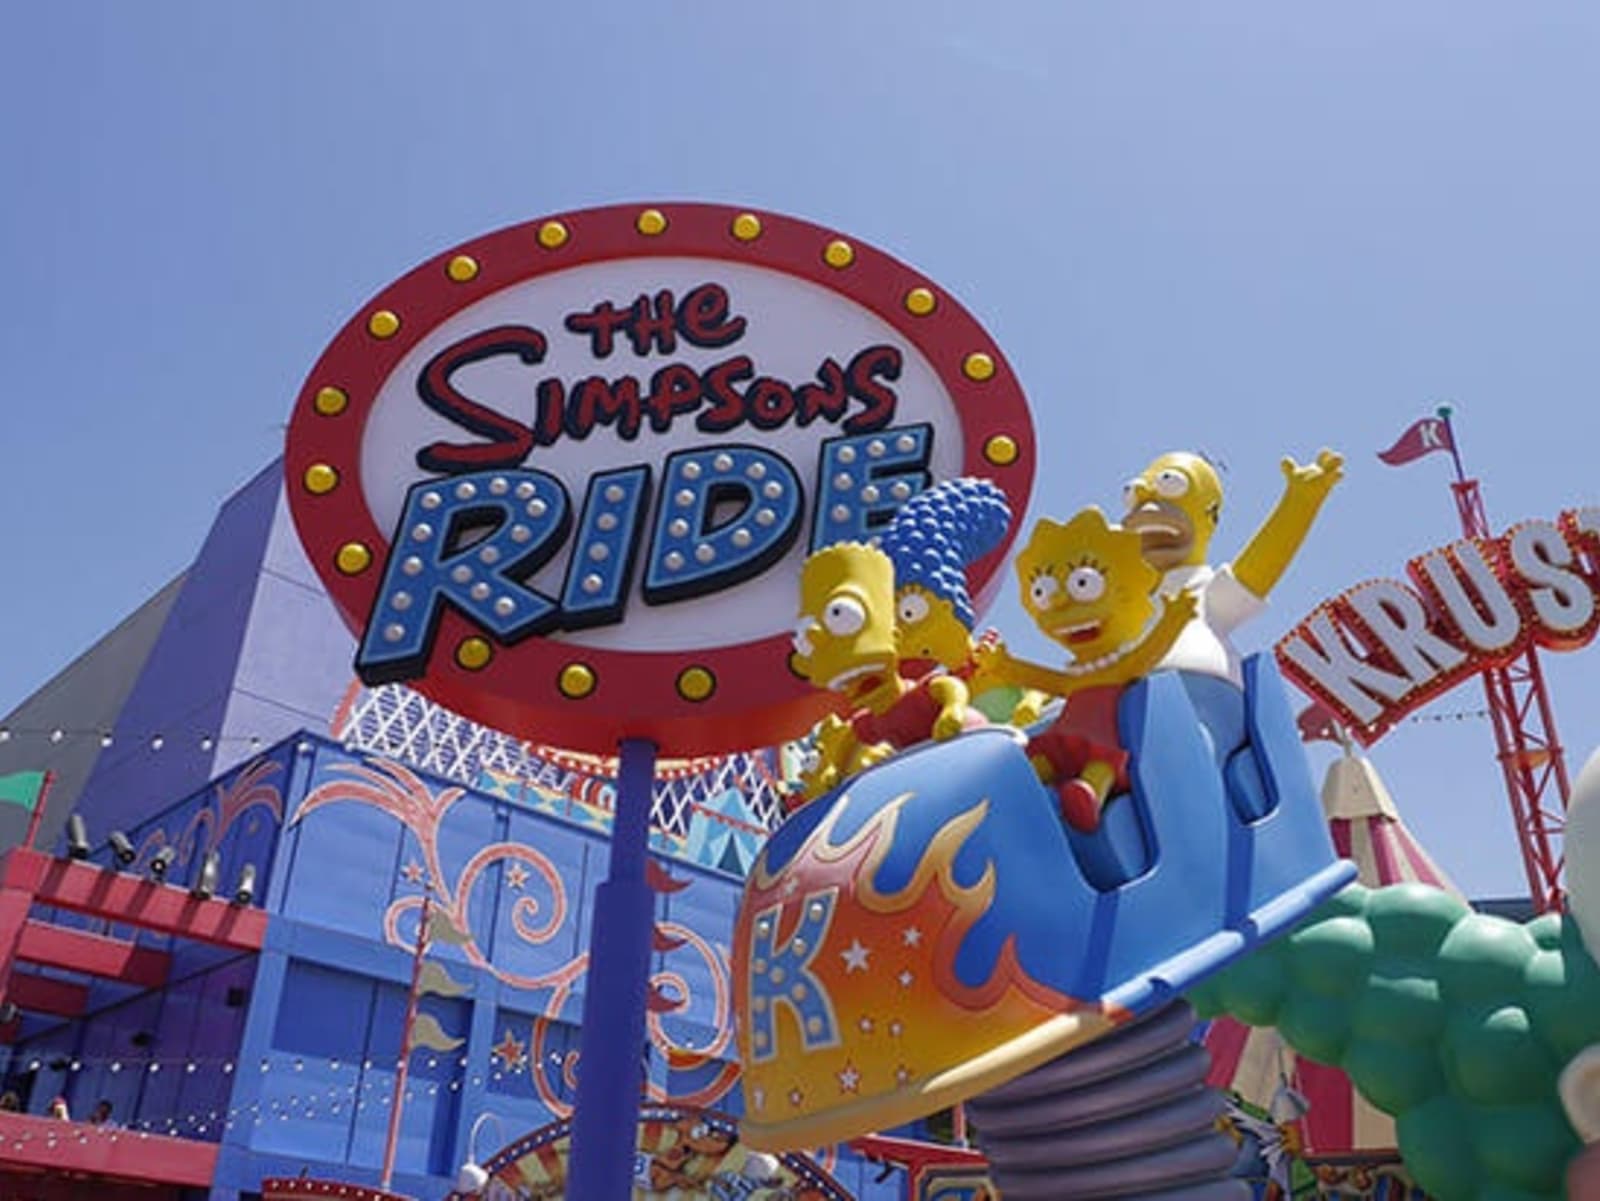 rs-the-simpsons-ride.jpg